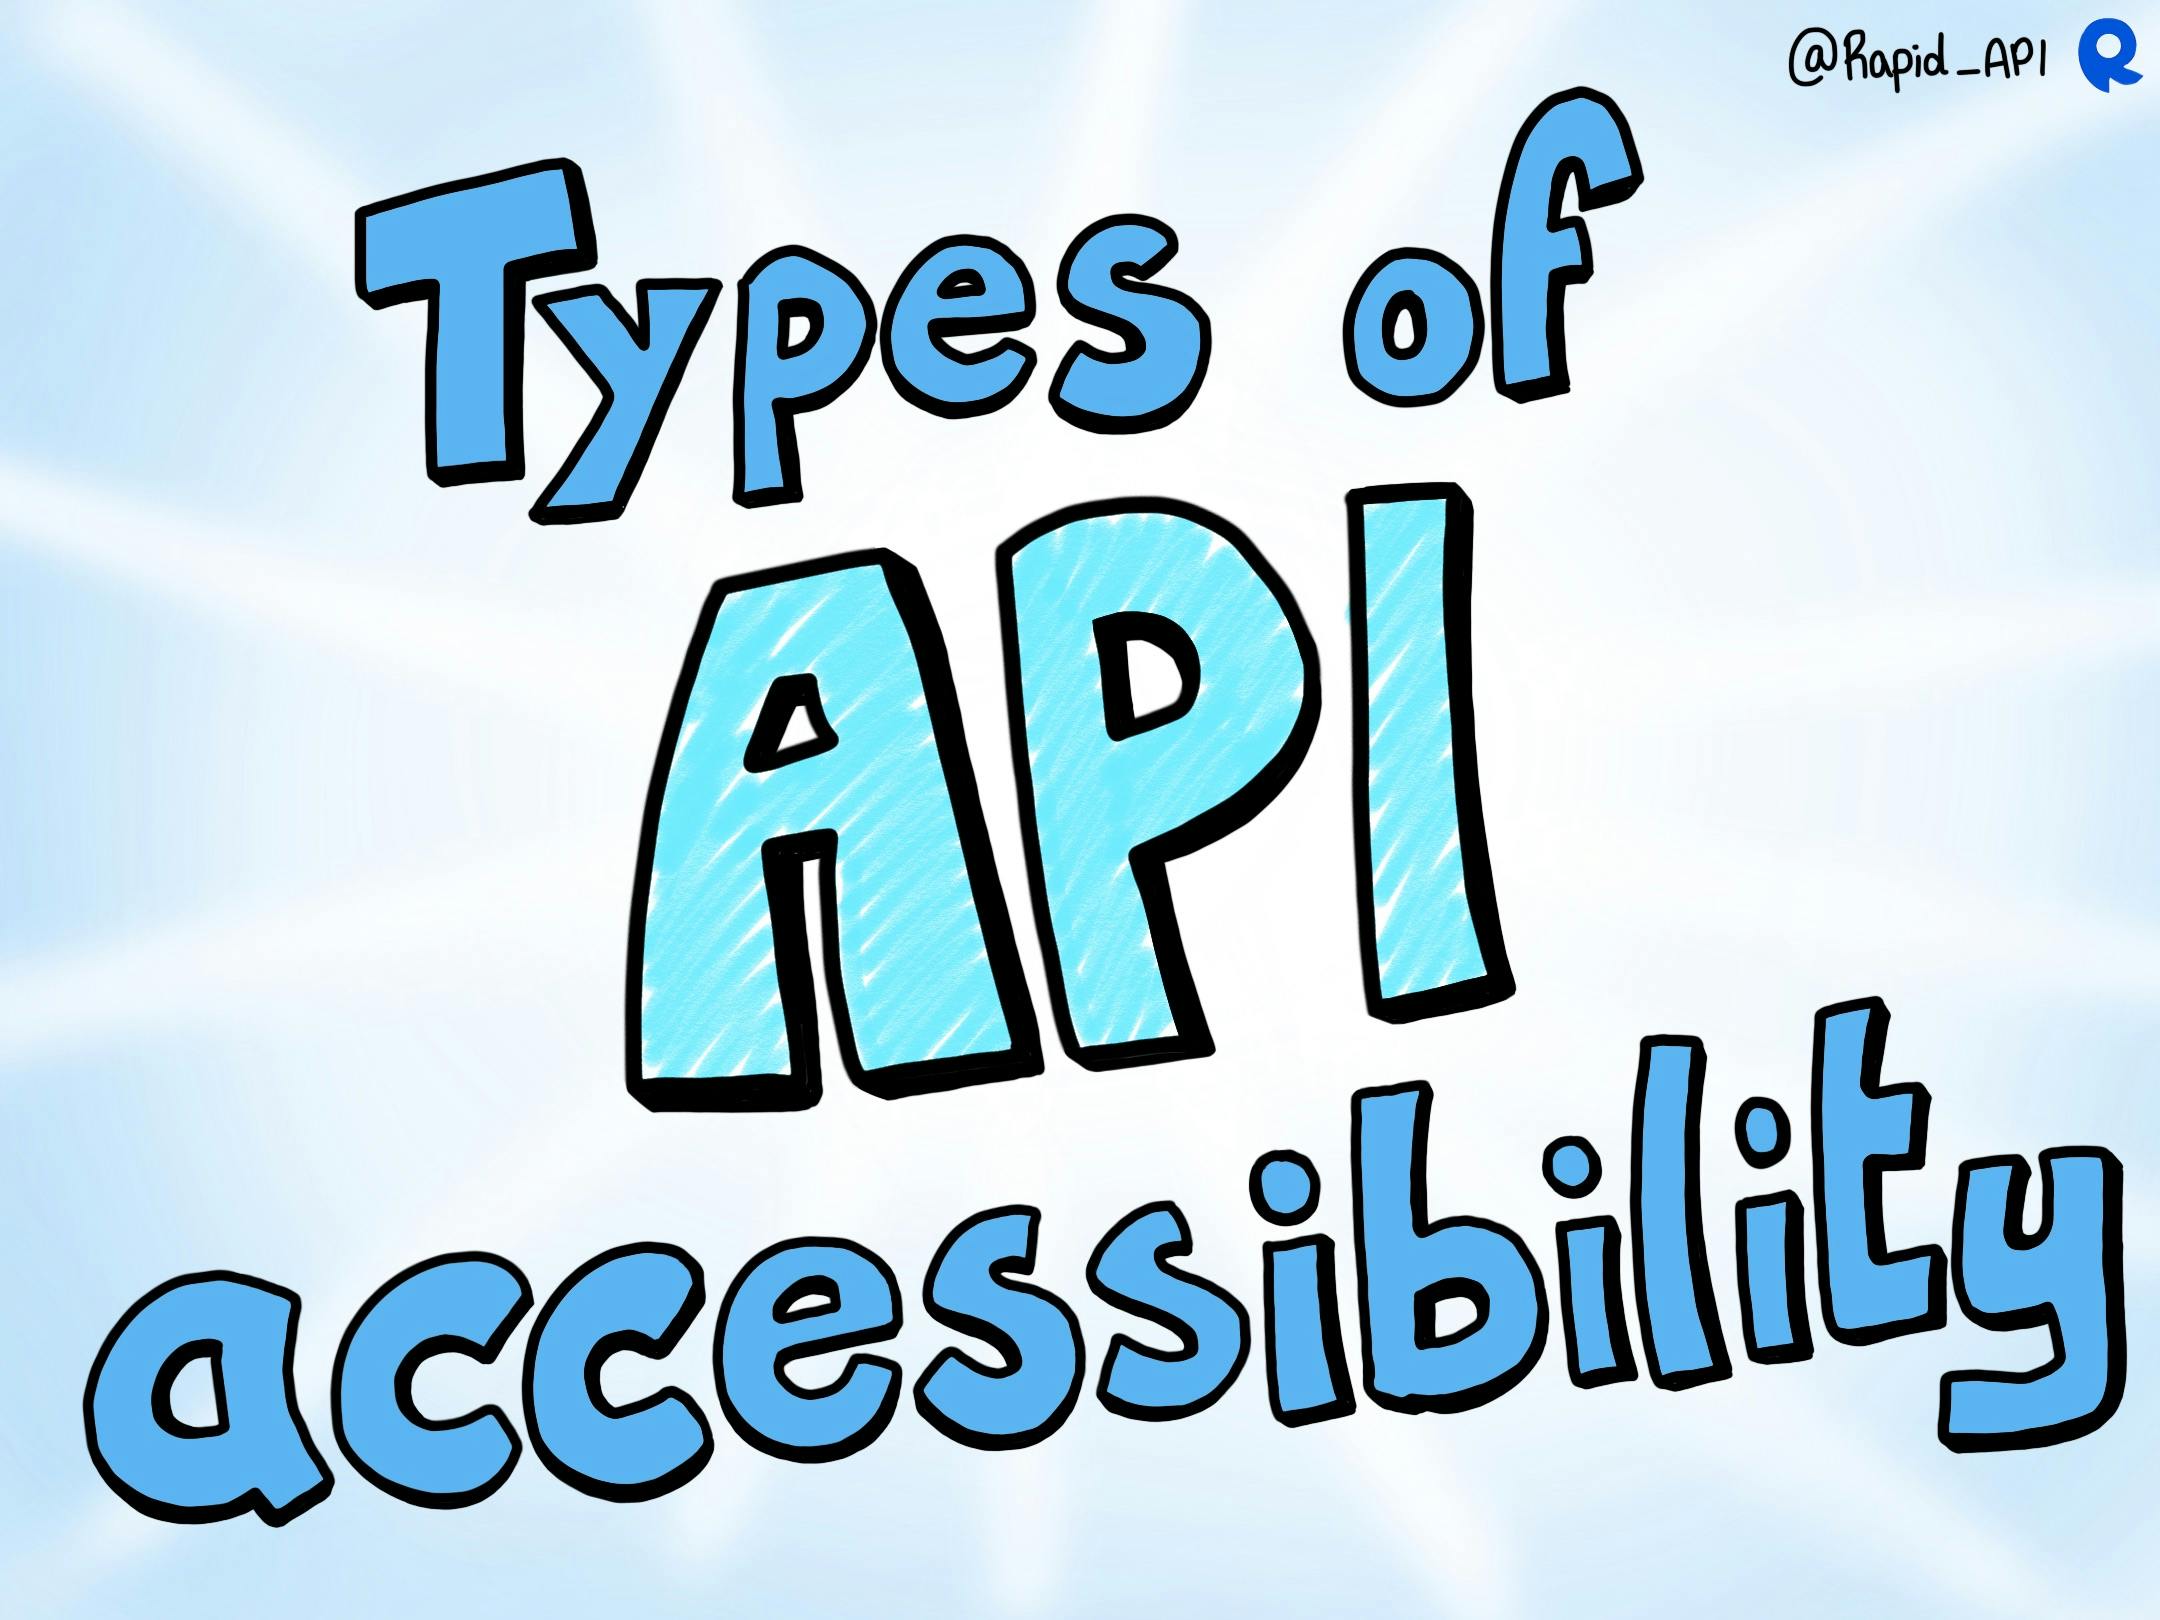 Types of API accessibility